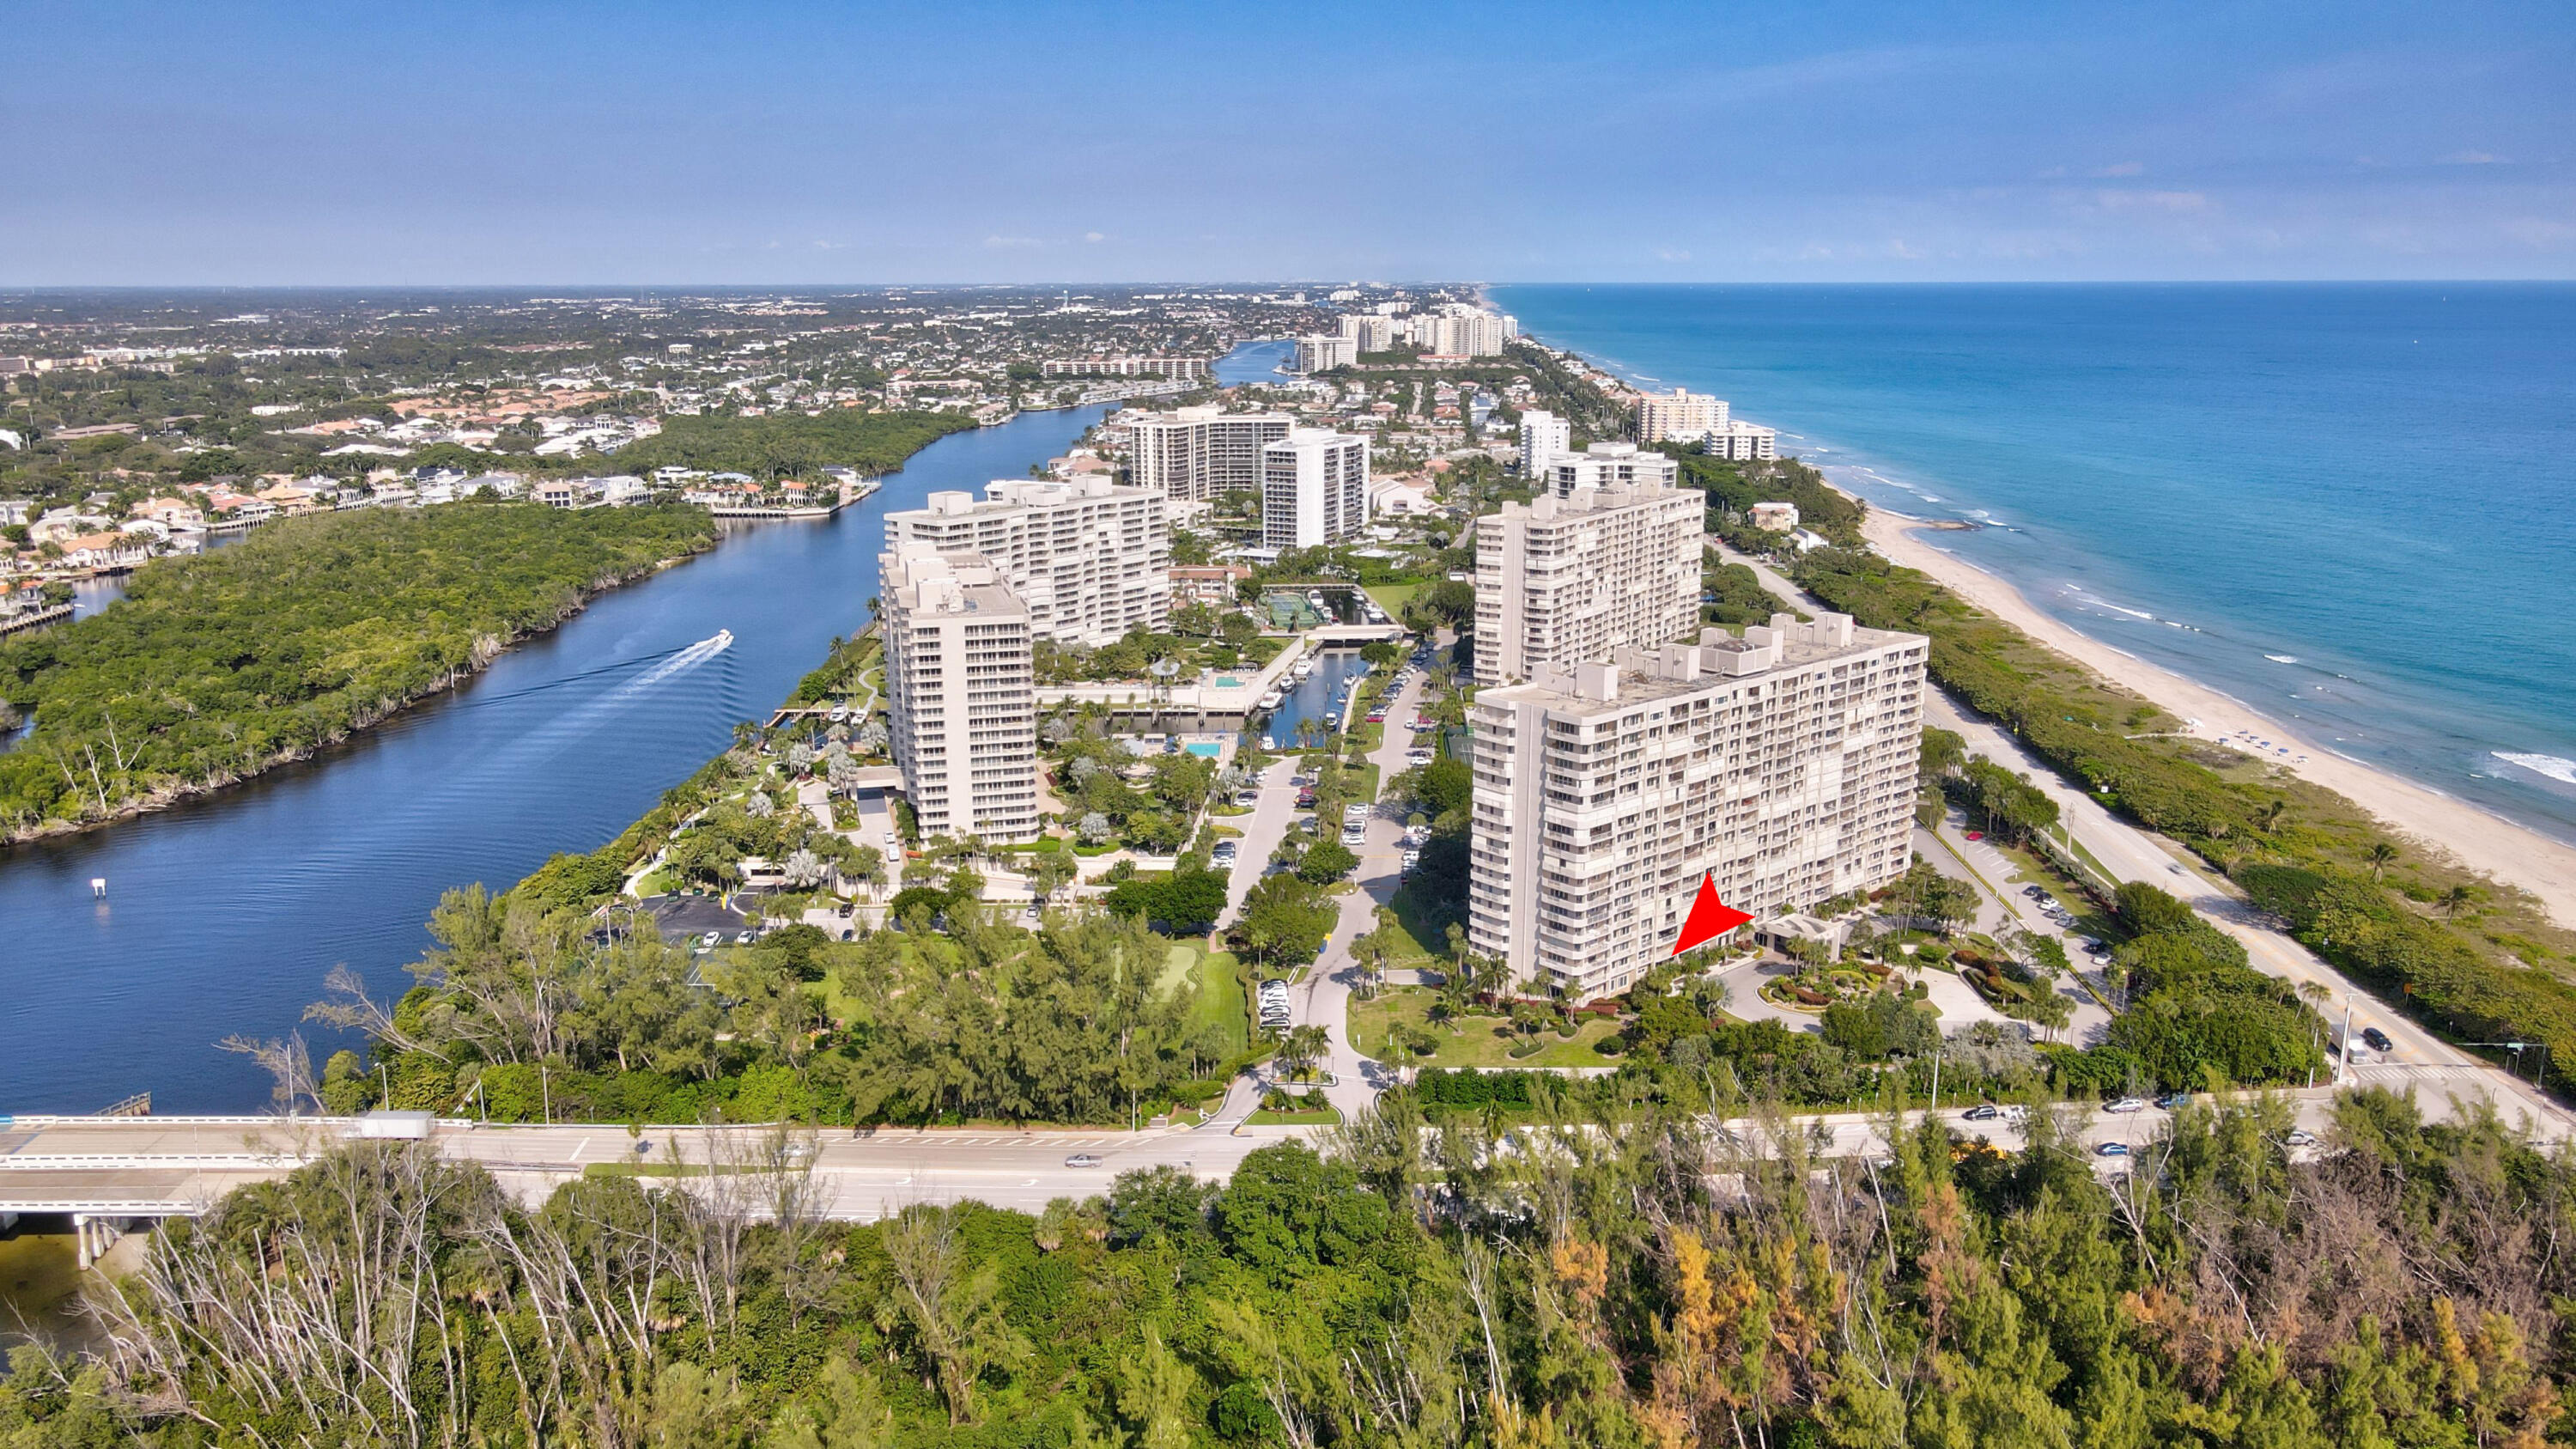 Incredible opportunity to purchase the largest 2 bedroom, 2 full bath, luxury condo available at Sea Ranch Club of Boca. This luxury condo community offers it all; a premiere East Boca Raton oceanfront community on A1A, amenities galore, under-ground parking, a 24 hour manned gate & security, concierge services, private deeded beach access, a boat marina, and 38 acres of lush landscaped grounds! Pet Friendly! This SE facing garden view condo has all newly installed impact glass windows and doors throughout, has been completely beautified with new white paint and trim, and shutters have been removed. Open and bright floor plan with Carrera Marble Master Bathroom, and enormous Master Closet! Move to the sunshine state and make this beautiful, clean canvas, your own! Sea Ranch Club of Boca Offerings:

*Unbelievable East Boca Raton Location - Easy access to major highways, airports, parks, dog parks, shopping, restaurants, arts &amp; culture.

*Gated Luxury Condo Community - Top of the Line Staff

*24 hour Security

*Concierge Services

*Underground Parking

*Ample Guest Parking

*Private Deeded Beach Access - Cabanas, Chairs, and Umbrellas provided by Community - Golf Cart Access

*5 Pools within Community

*5 Tennis Courts

*2 Pickle Ball Courts

*ShuffleBoard

*Billiards

*Ping Pong

*Gyms/Fitness Centers

*Clubhouse

*Grills/BBQ Areas

*Saunas

*4 Whirlpools/Hot tubs

*Marina

*Putting Green

*38 Acres of Landscaped Grounds

*Dog Park

*Party Room

*Library

*Card Rooms/Game Rooms